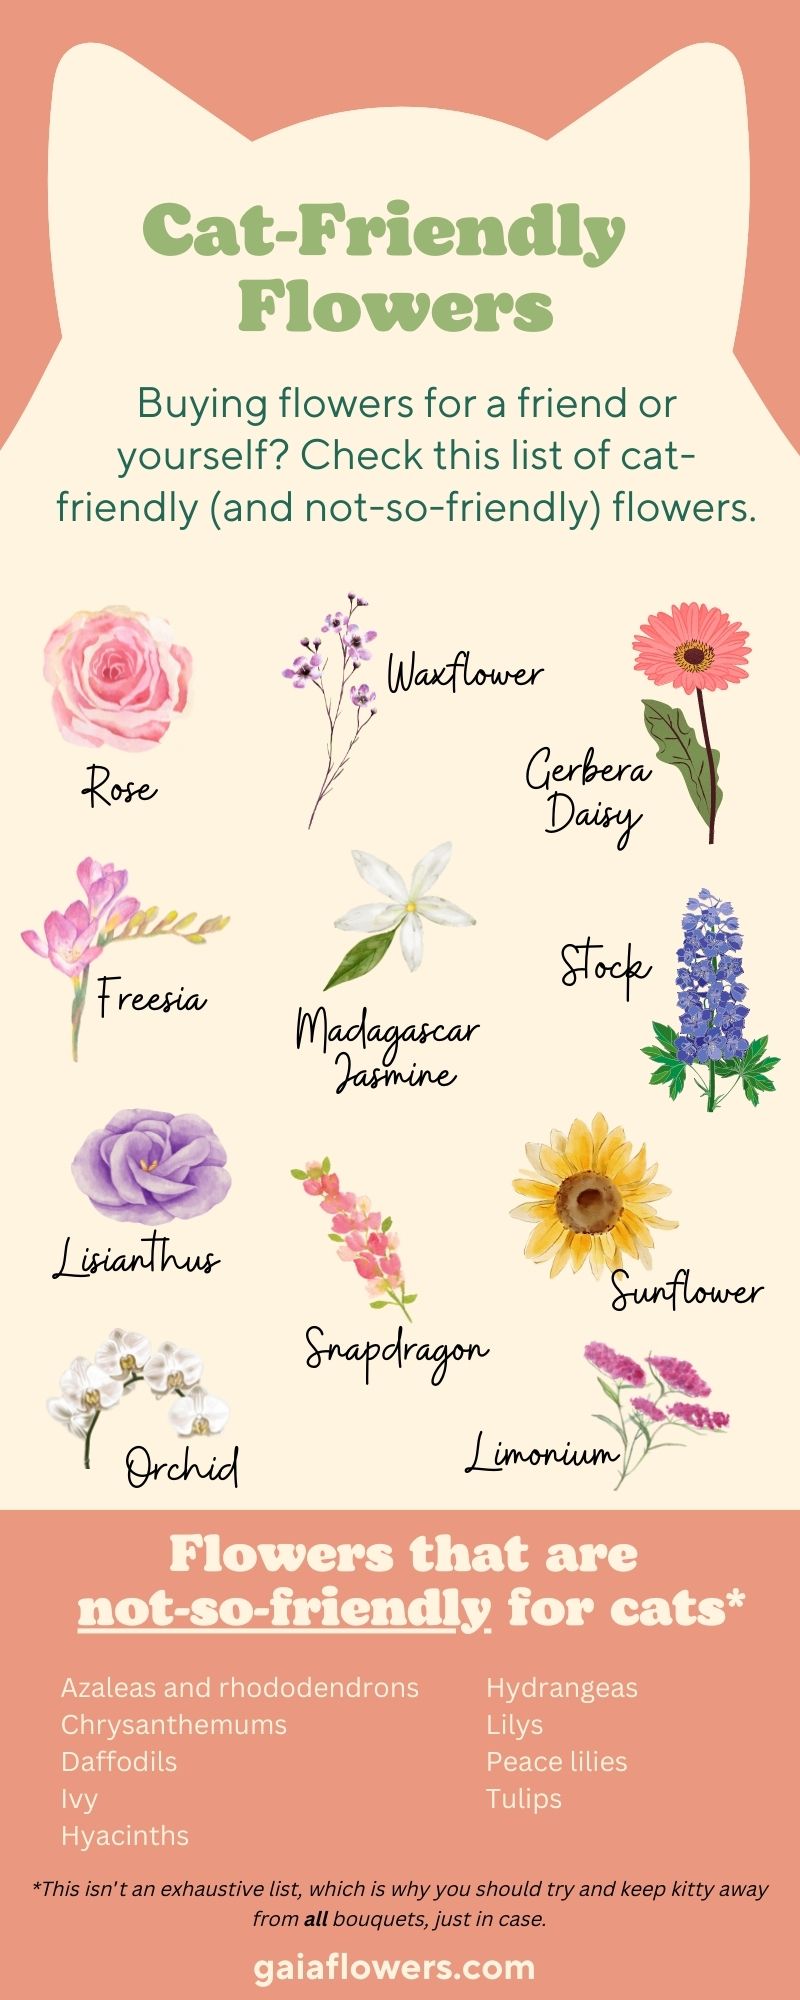 Infographic list of cat friendly flowers.